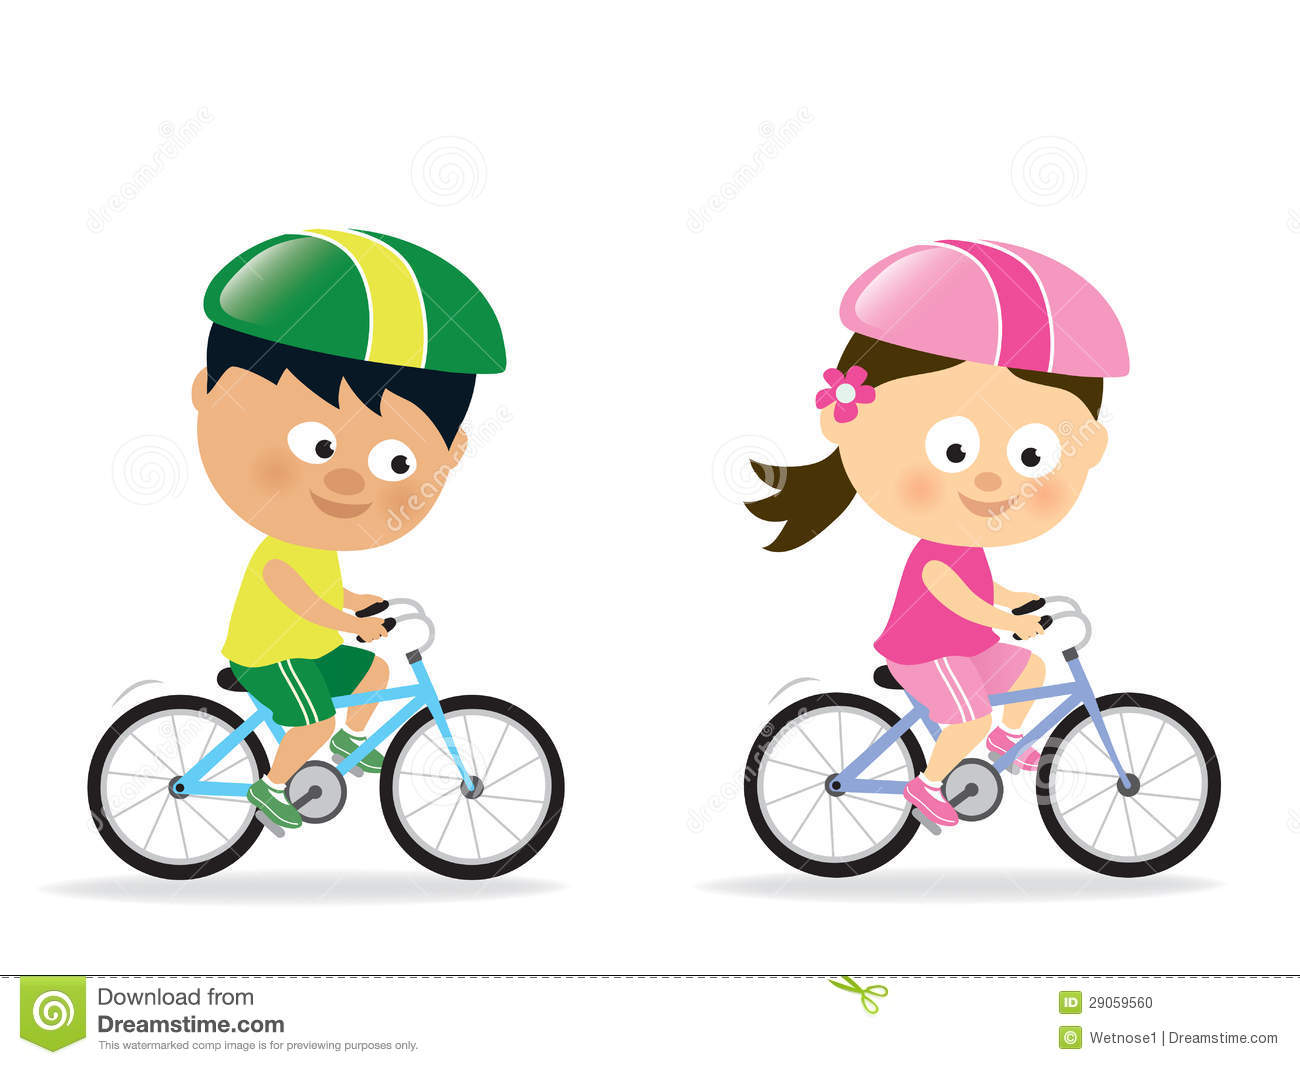 Kids bicycle clipart.